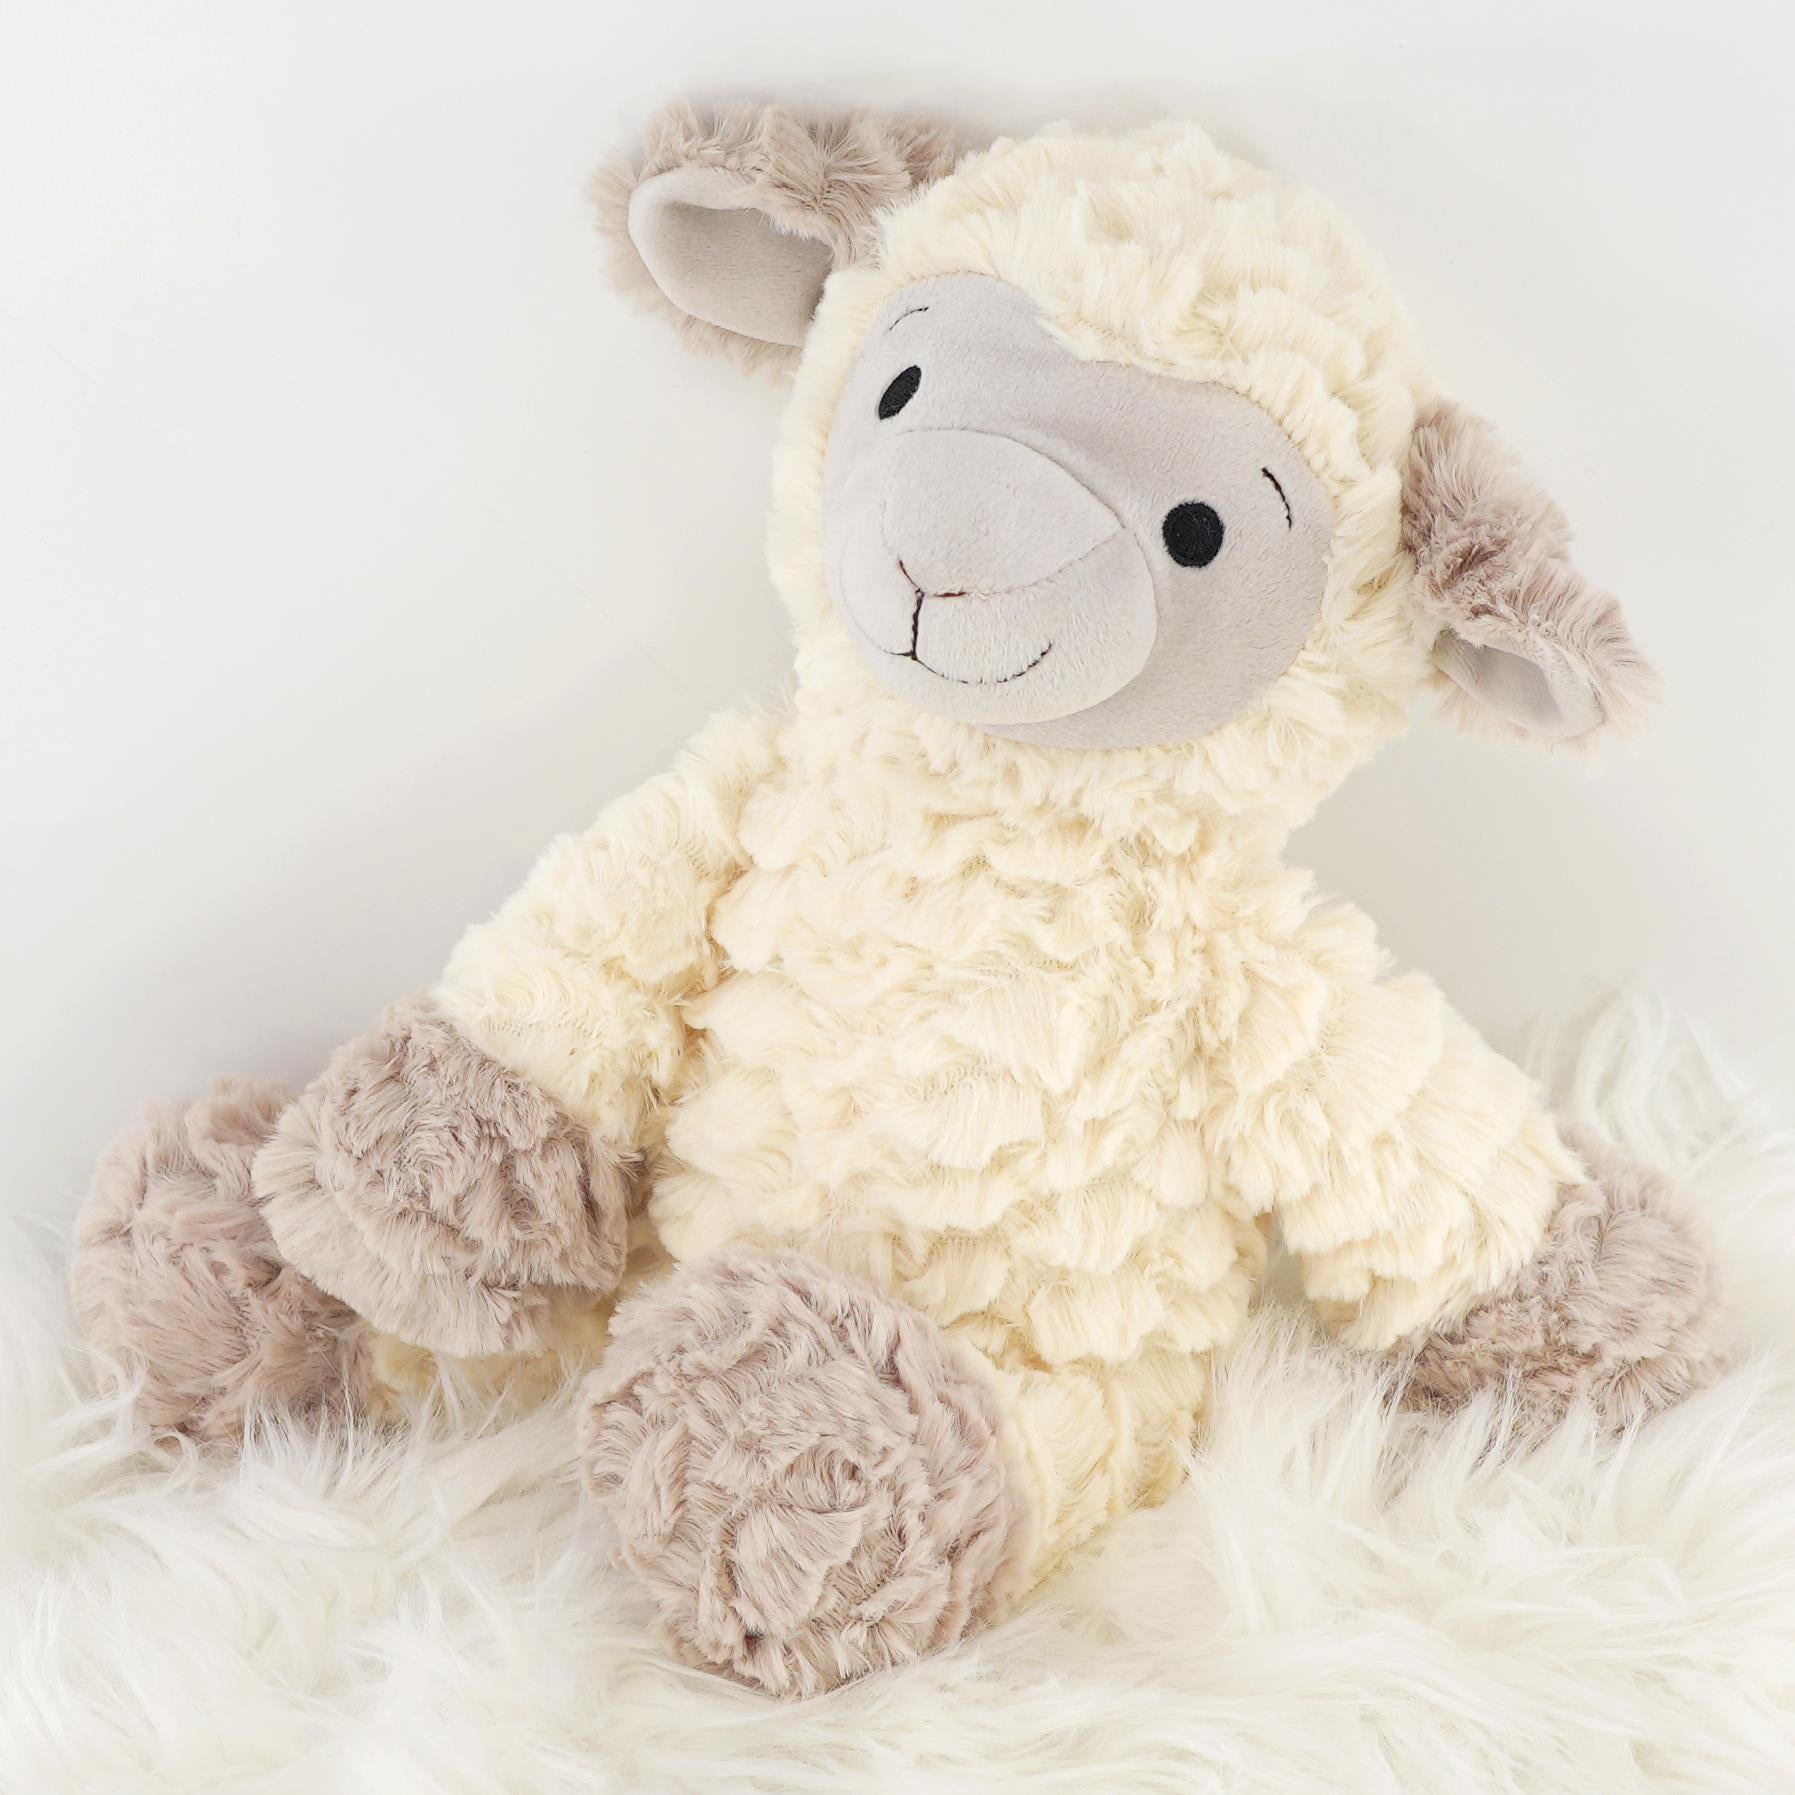 Plush Super Soft Lamb Cuddly Toy by The Magic Toy ShopThe Magic